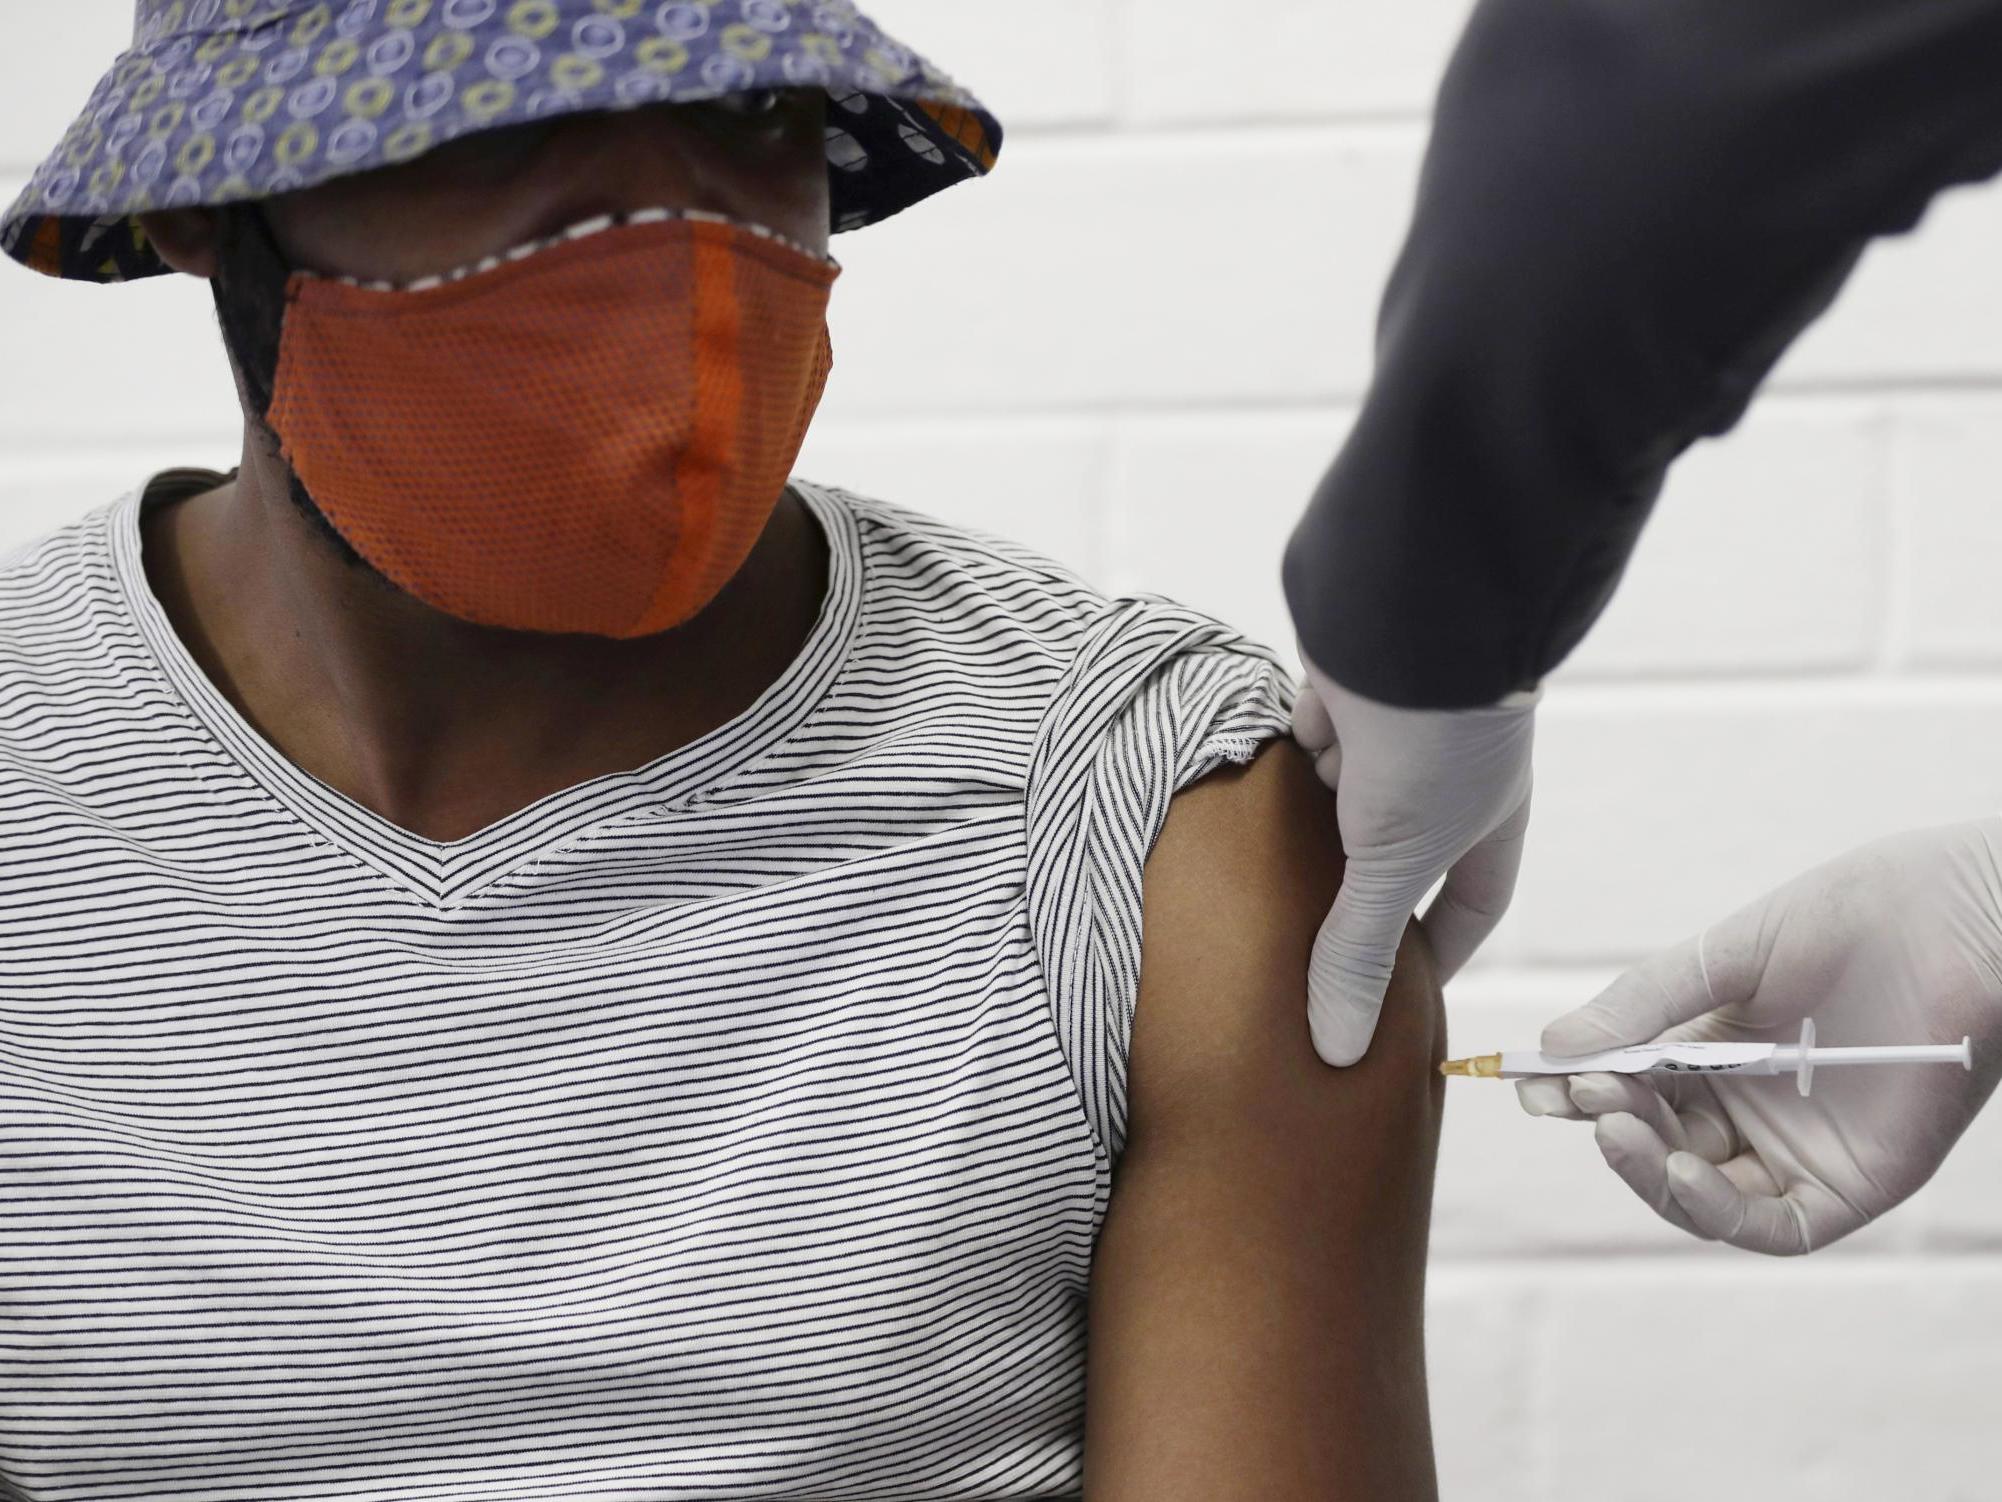 A volunteer receives a Covid-19 test vaccine injection developed at the University of Oxford in Britain, at the Chris Hani Baragwanath hospital in Soweto, Johannesburg, South Africa